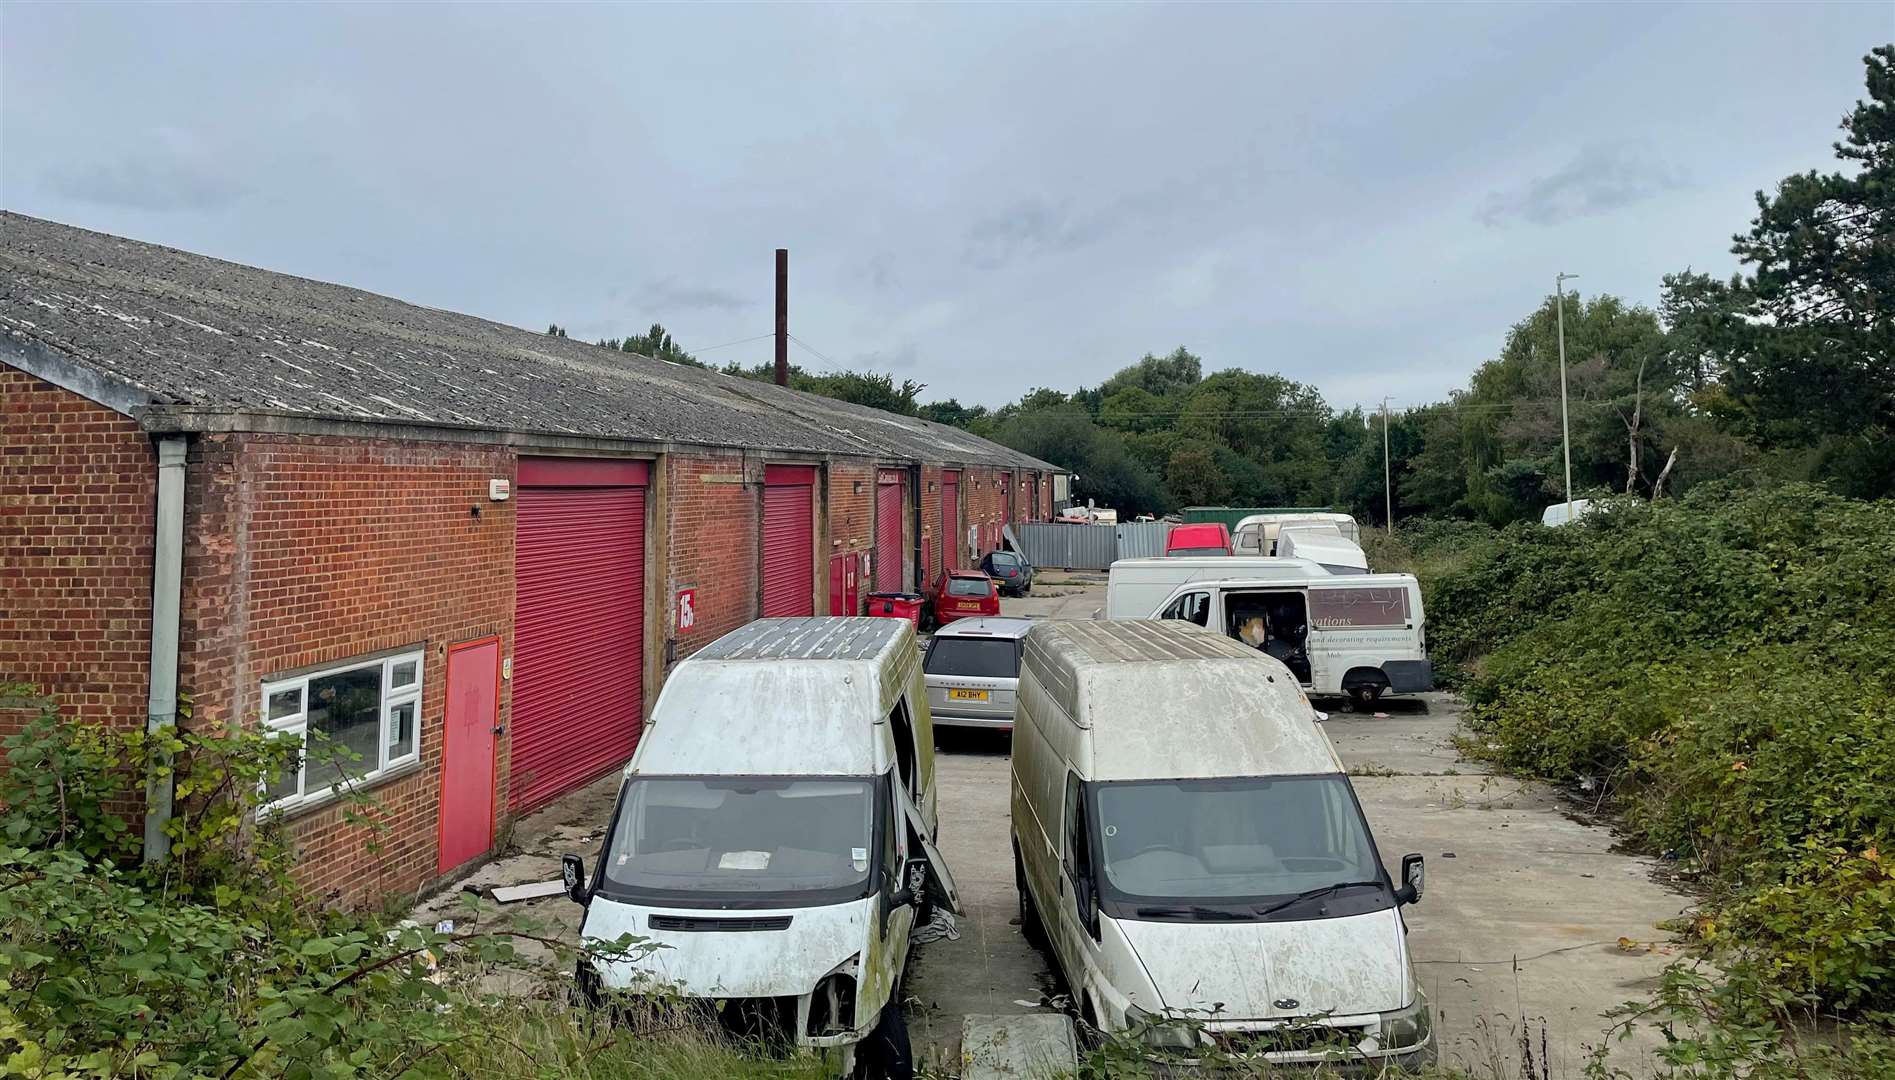 West Midlands Storage Clearance, Lock-up Units Cleared